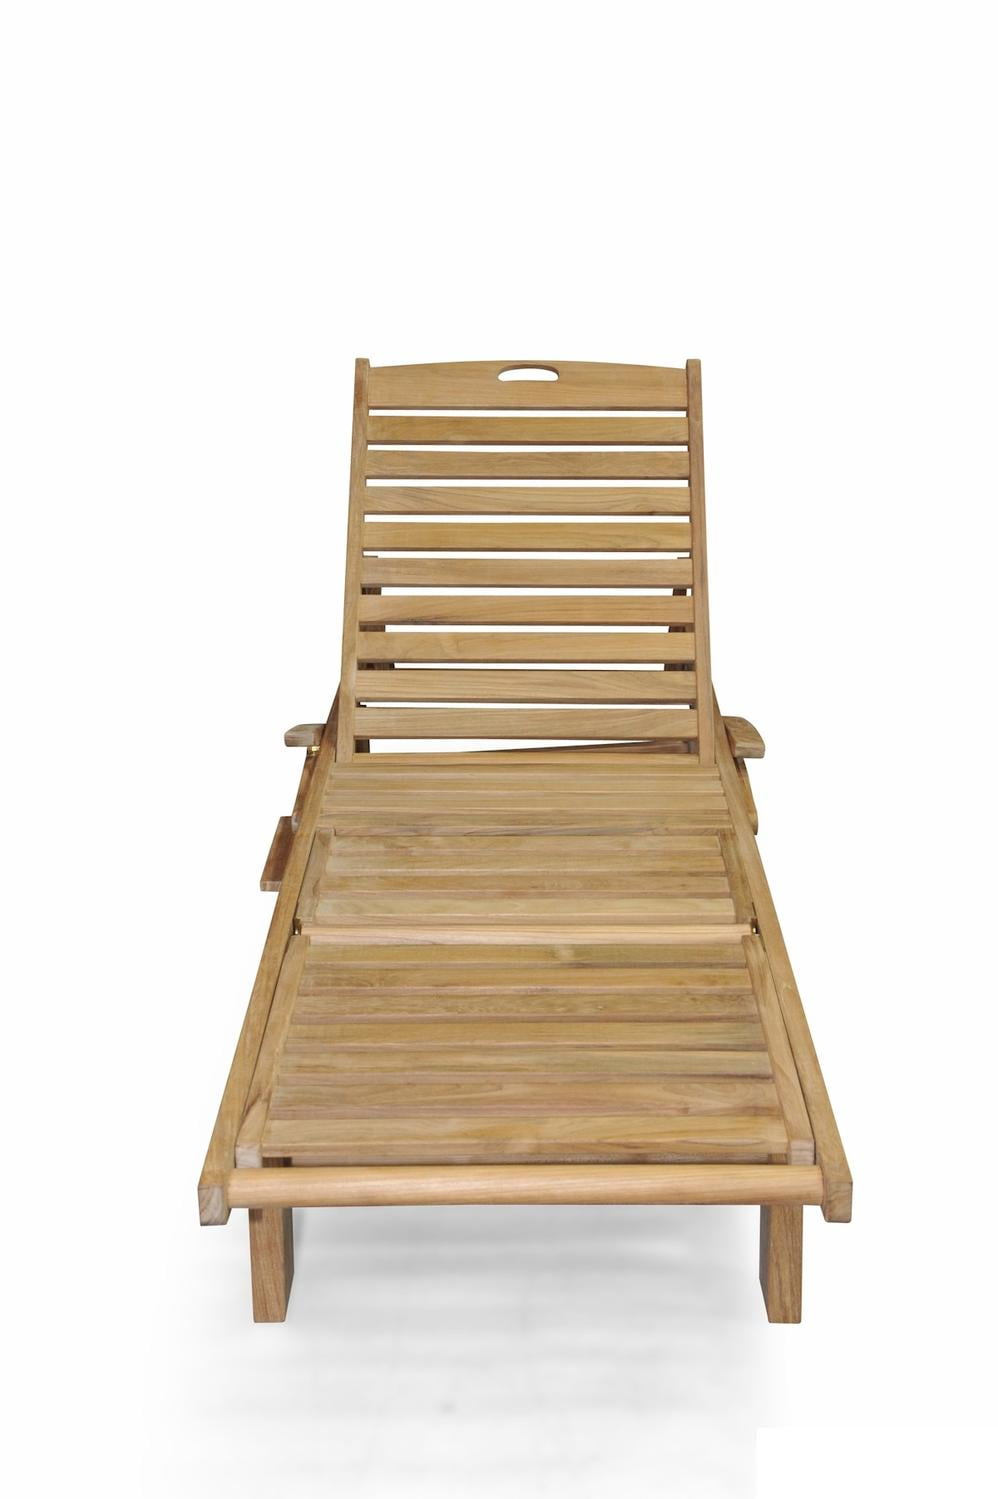 80" Natural Teak Outdoor Patio Wooden Chaise Lounge Chair ...